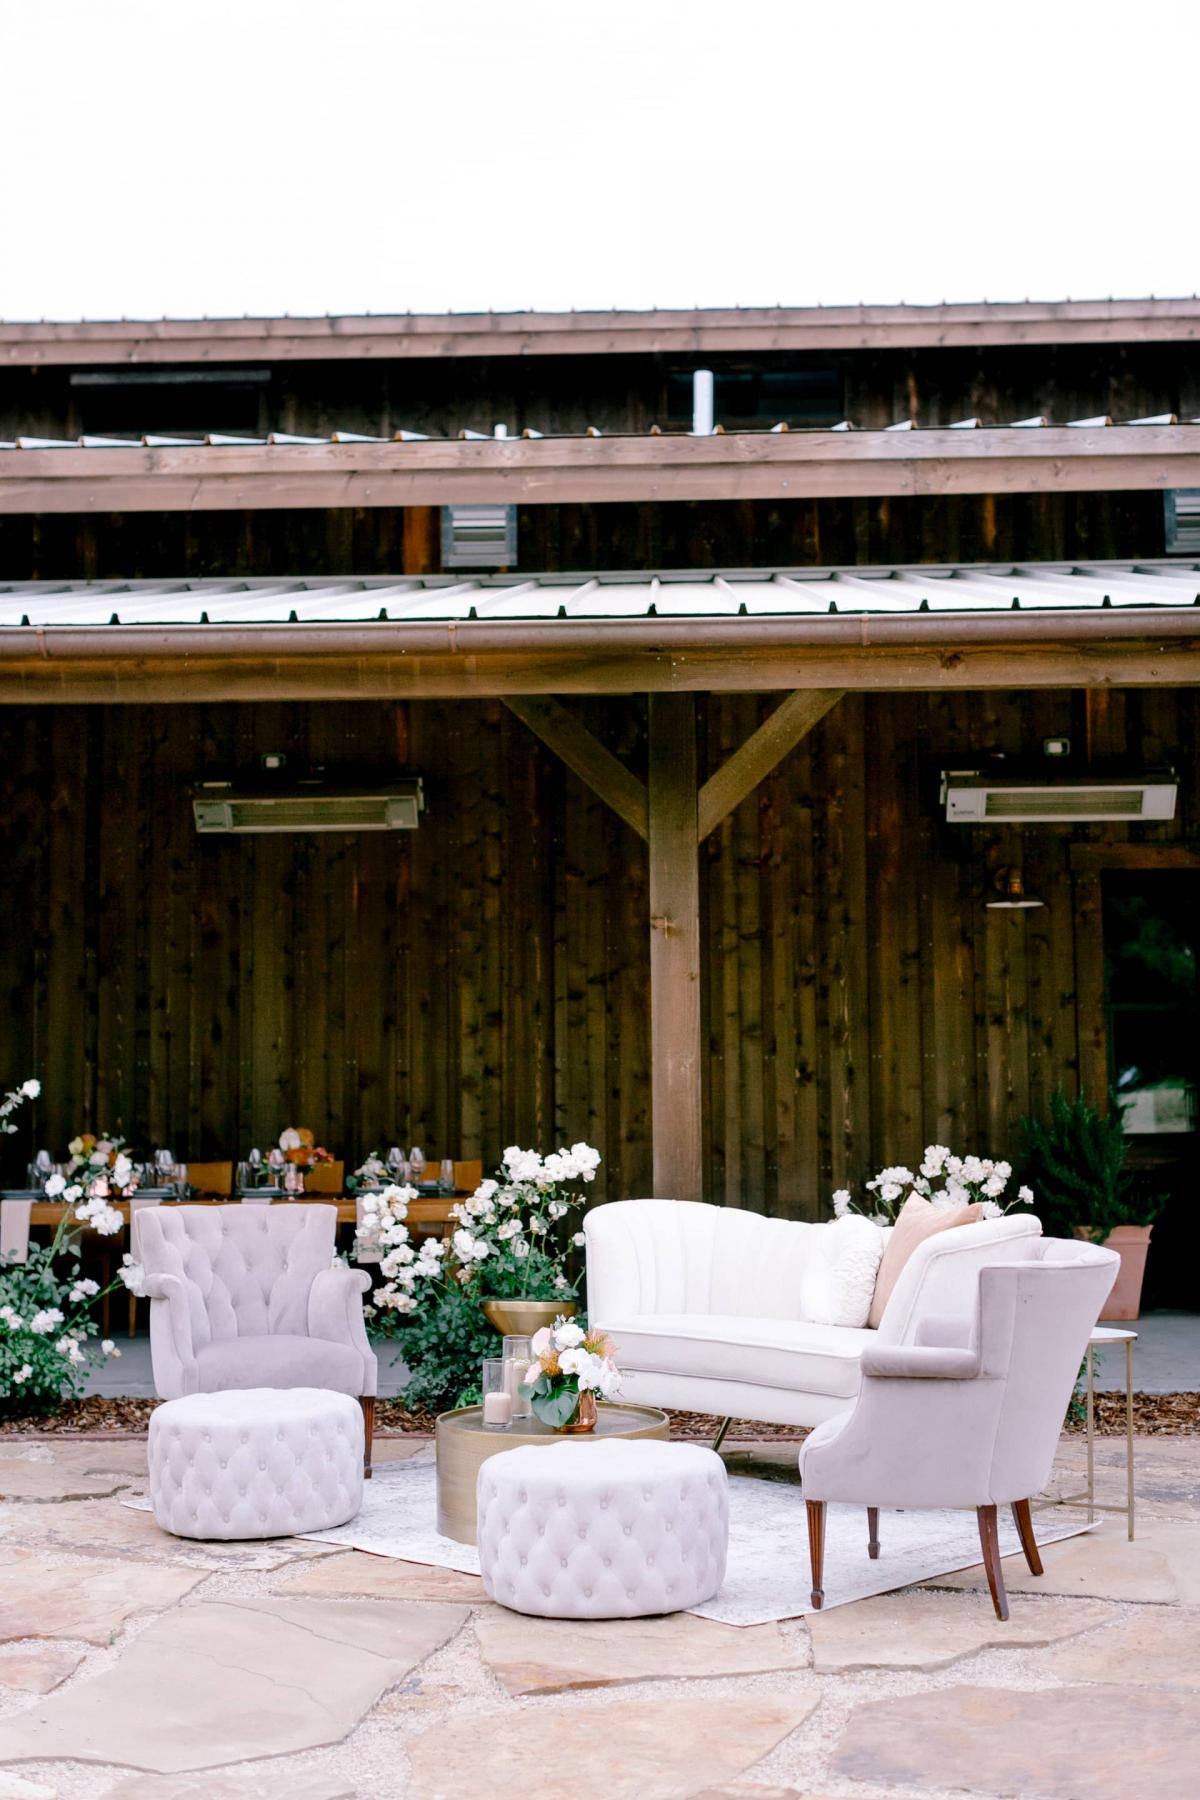 Outdoor Setting with Couch, 2 Chairs, Coffee Table and Poofs with Petros Winery Behind for Mika & James's Wedding